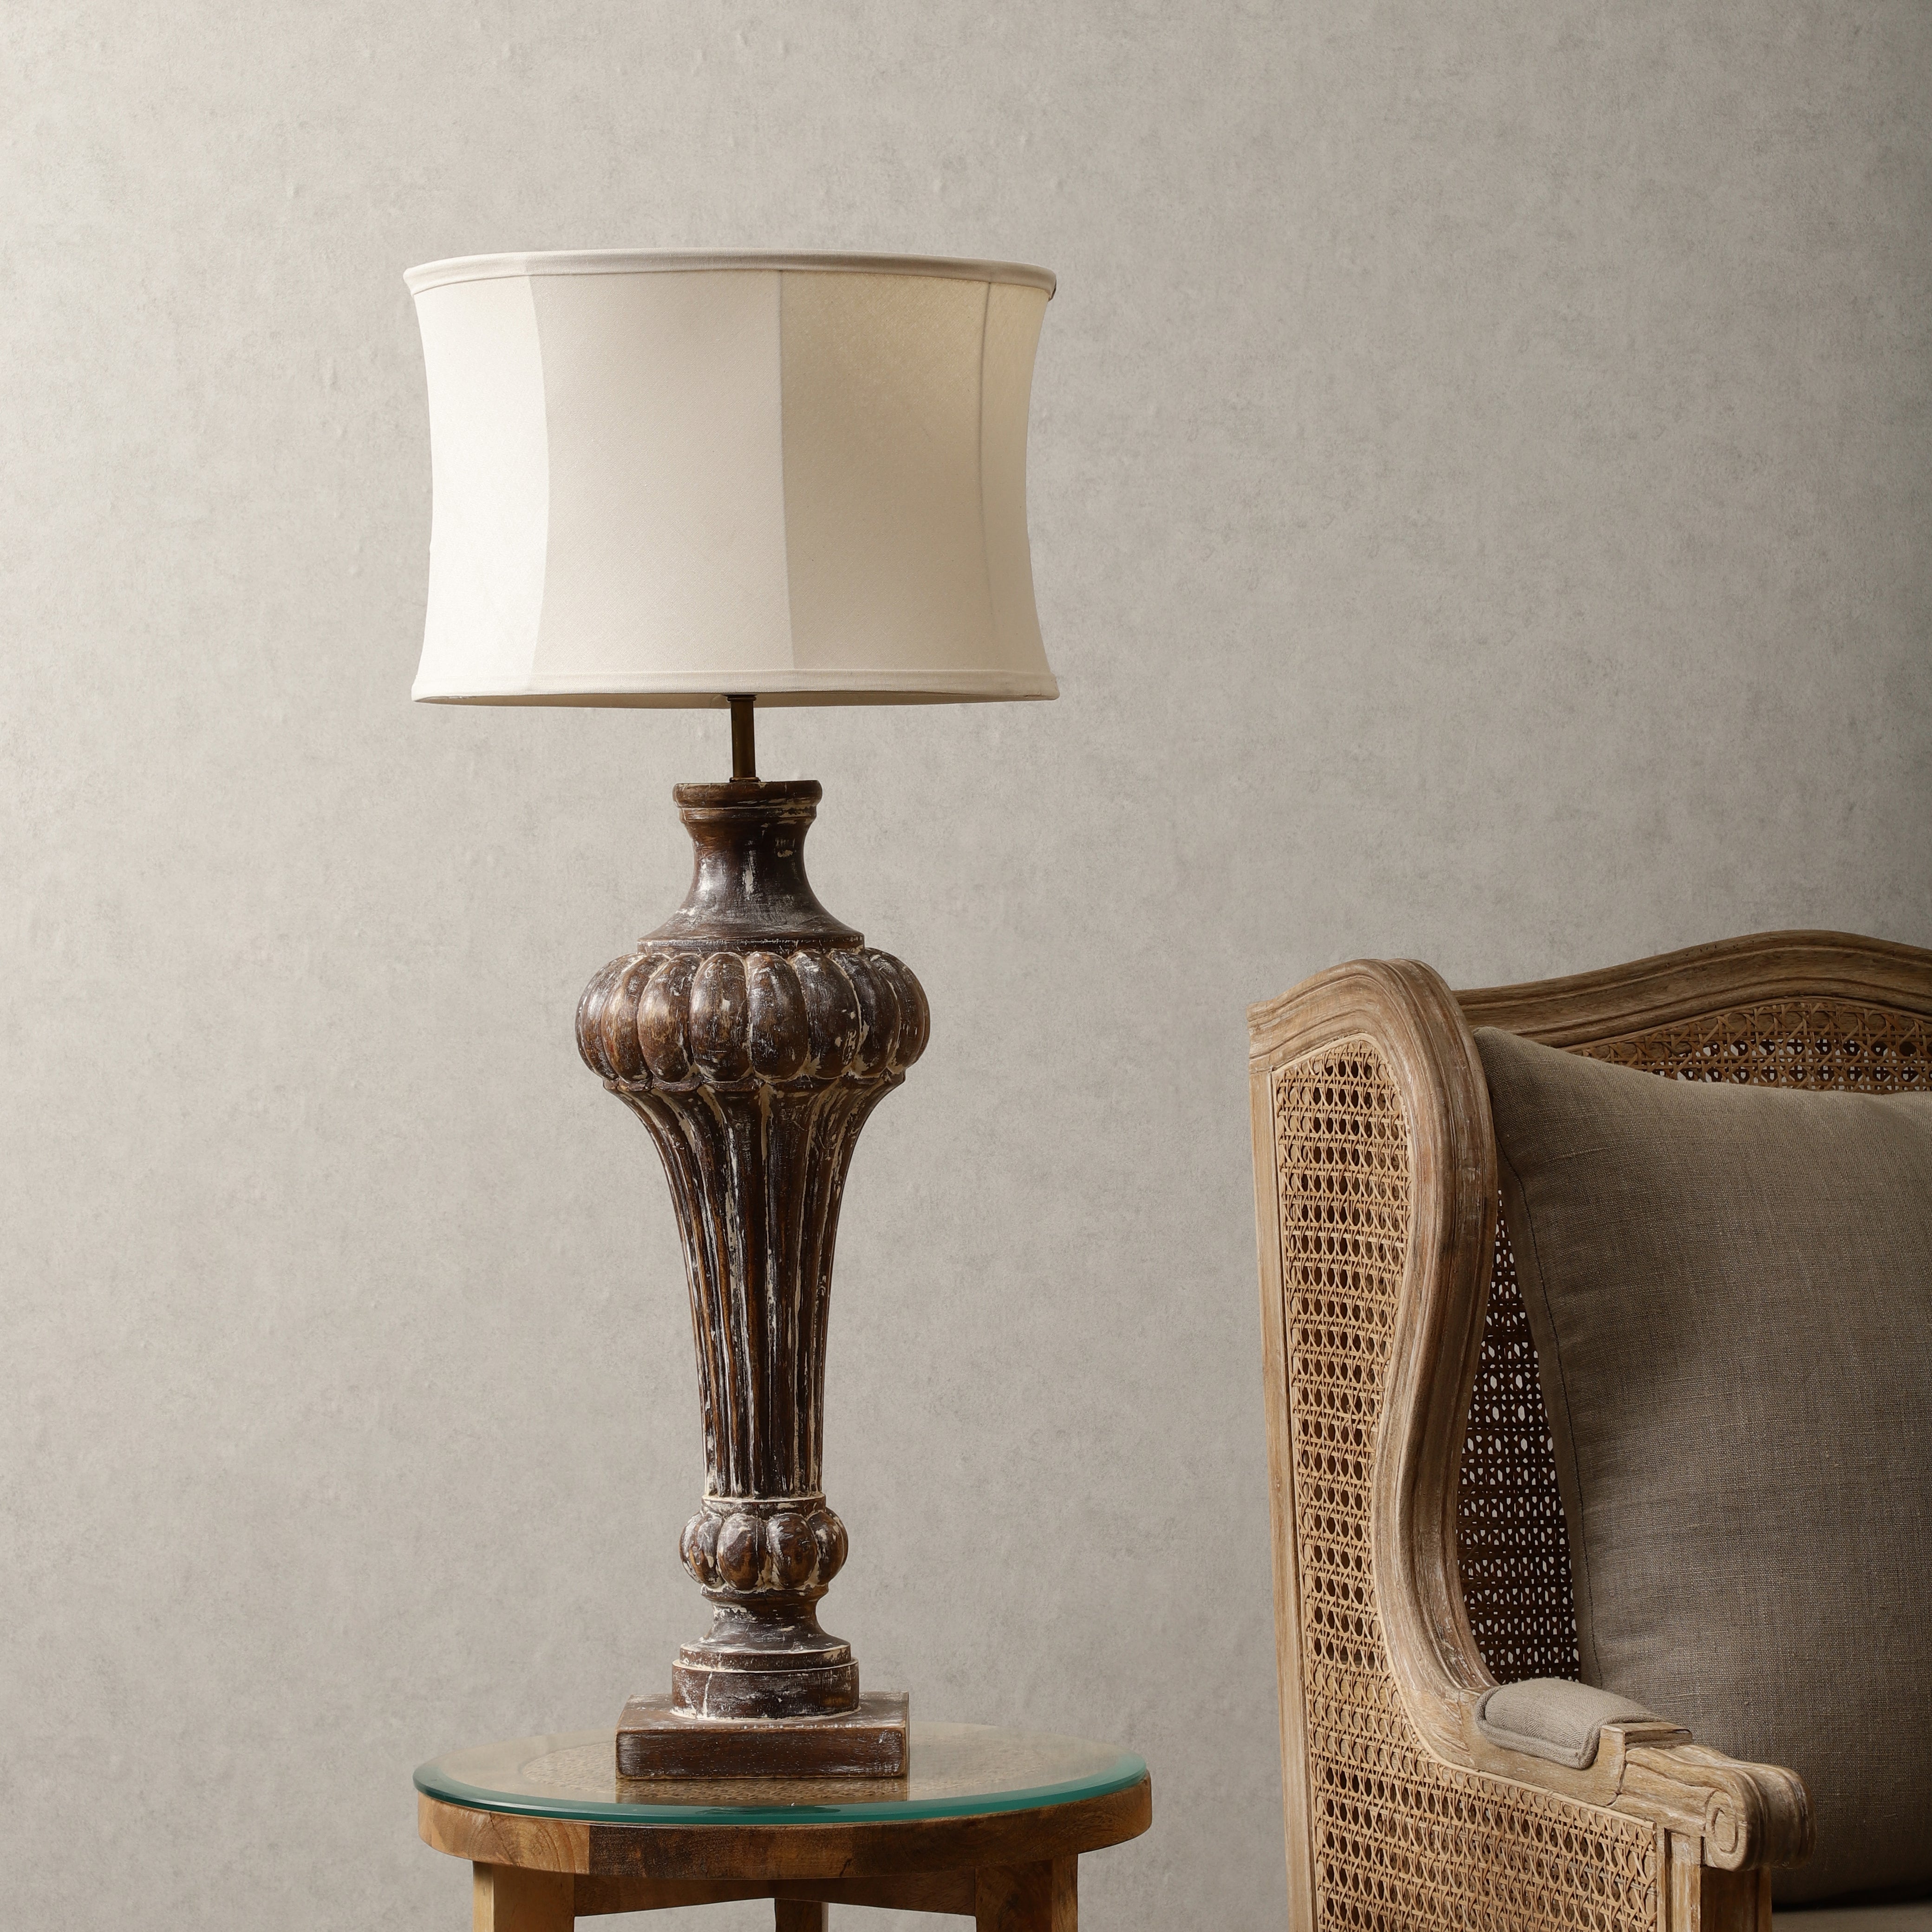 Sycamore Table Lamp